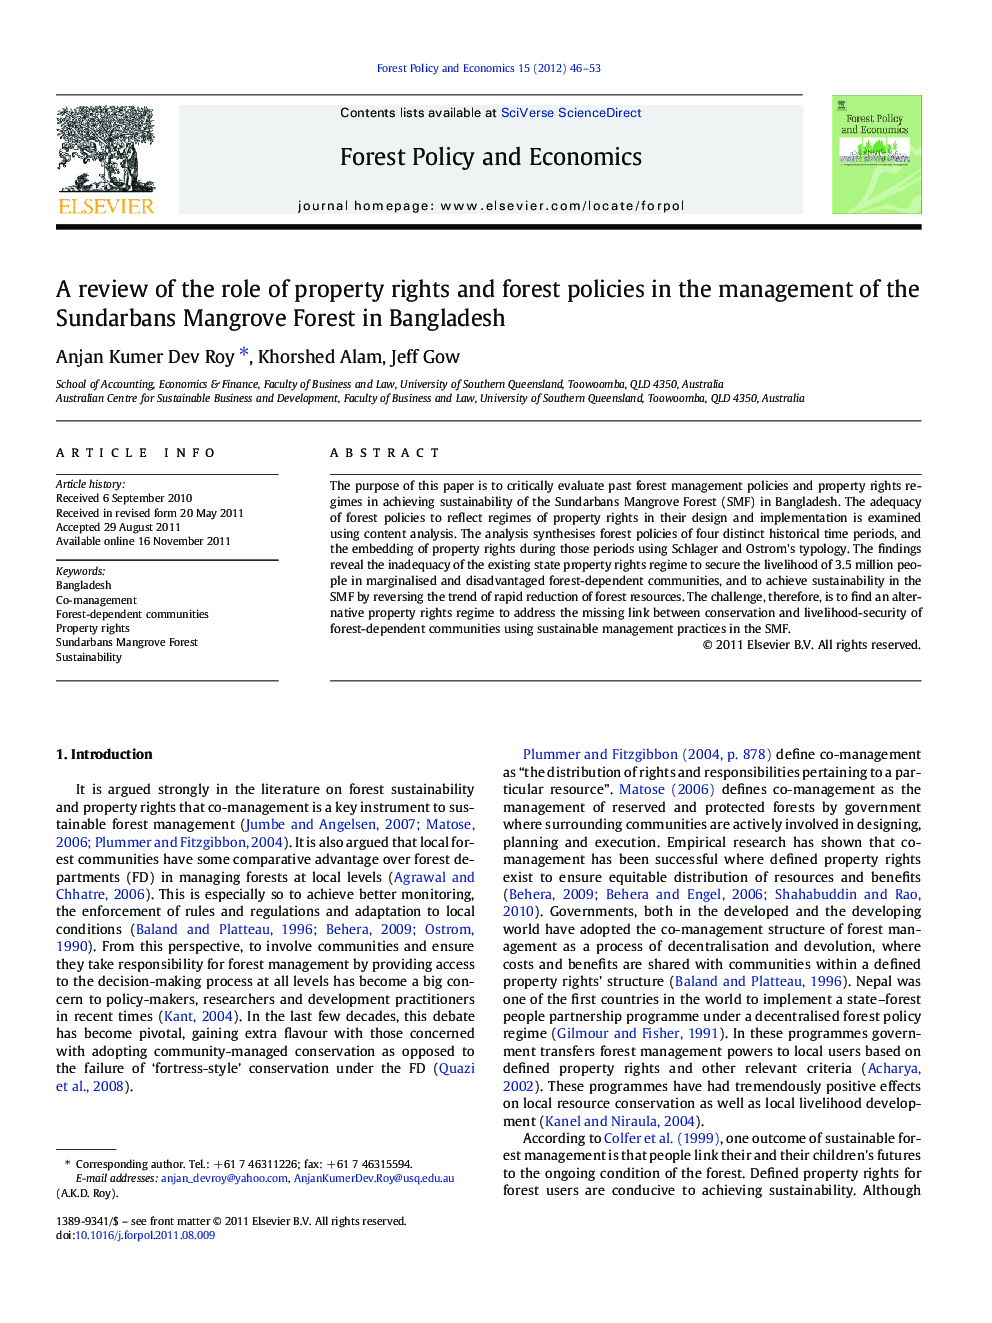 A review of the role of property rights and forest policies in the management of the Sundarbans Mangrove Forest in Bangladesh